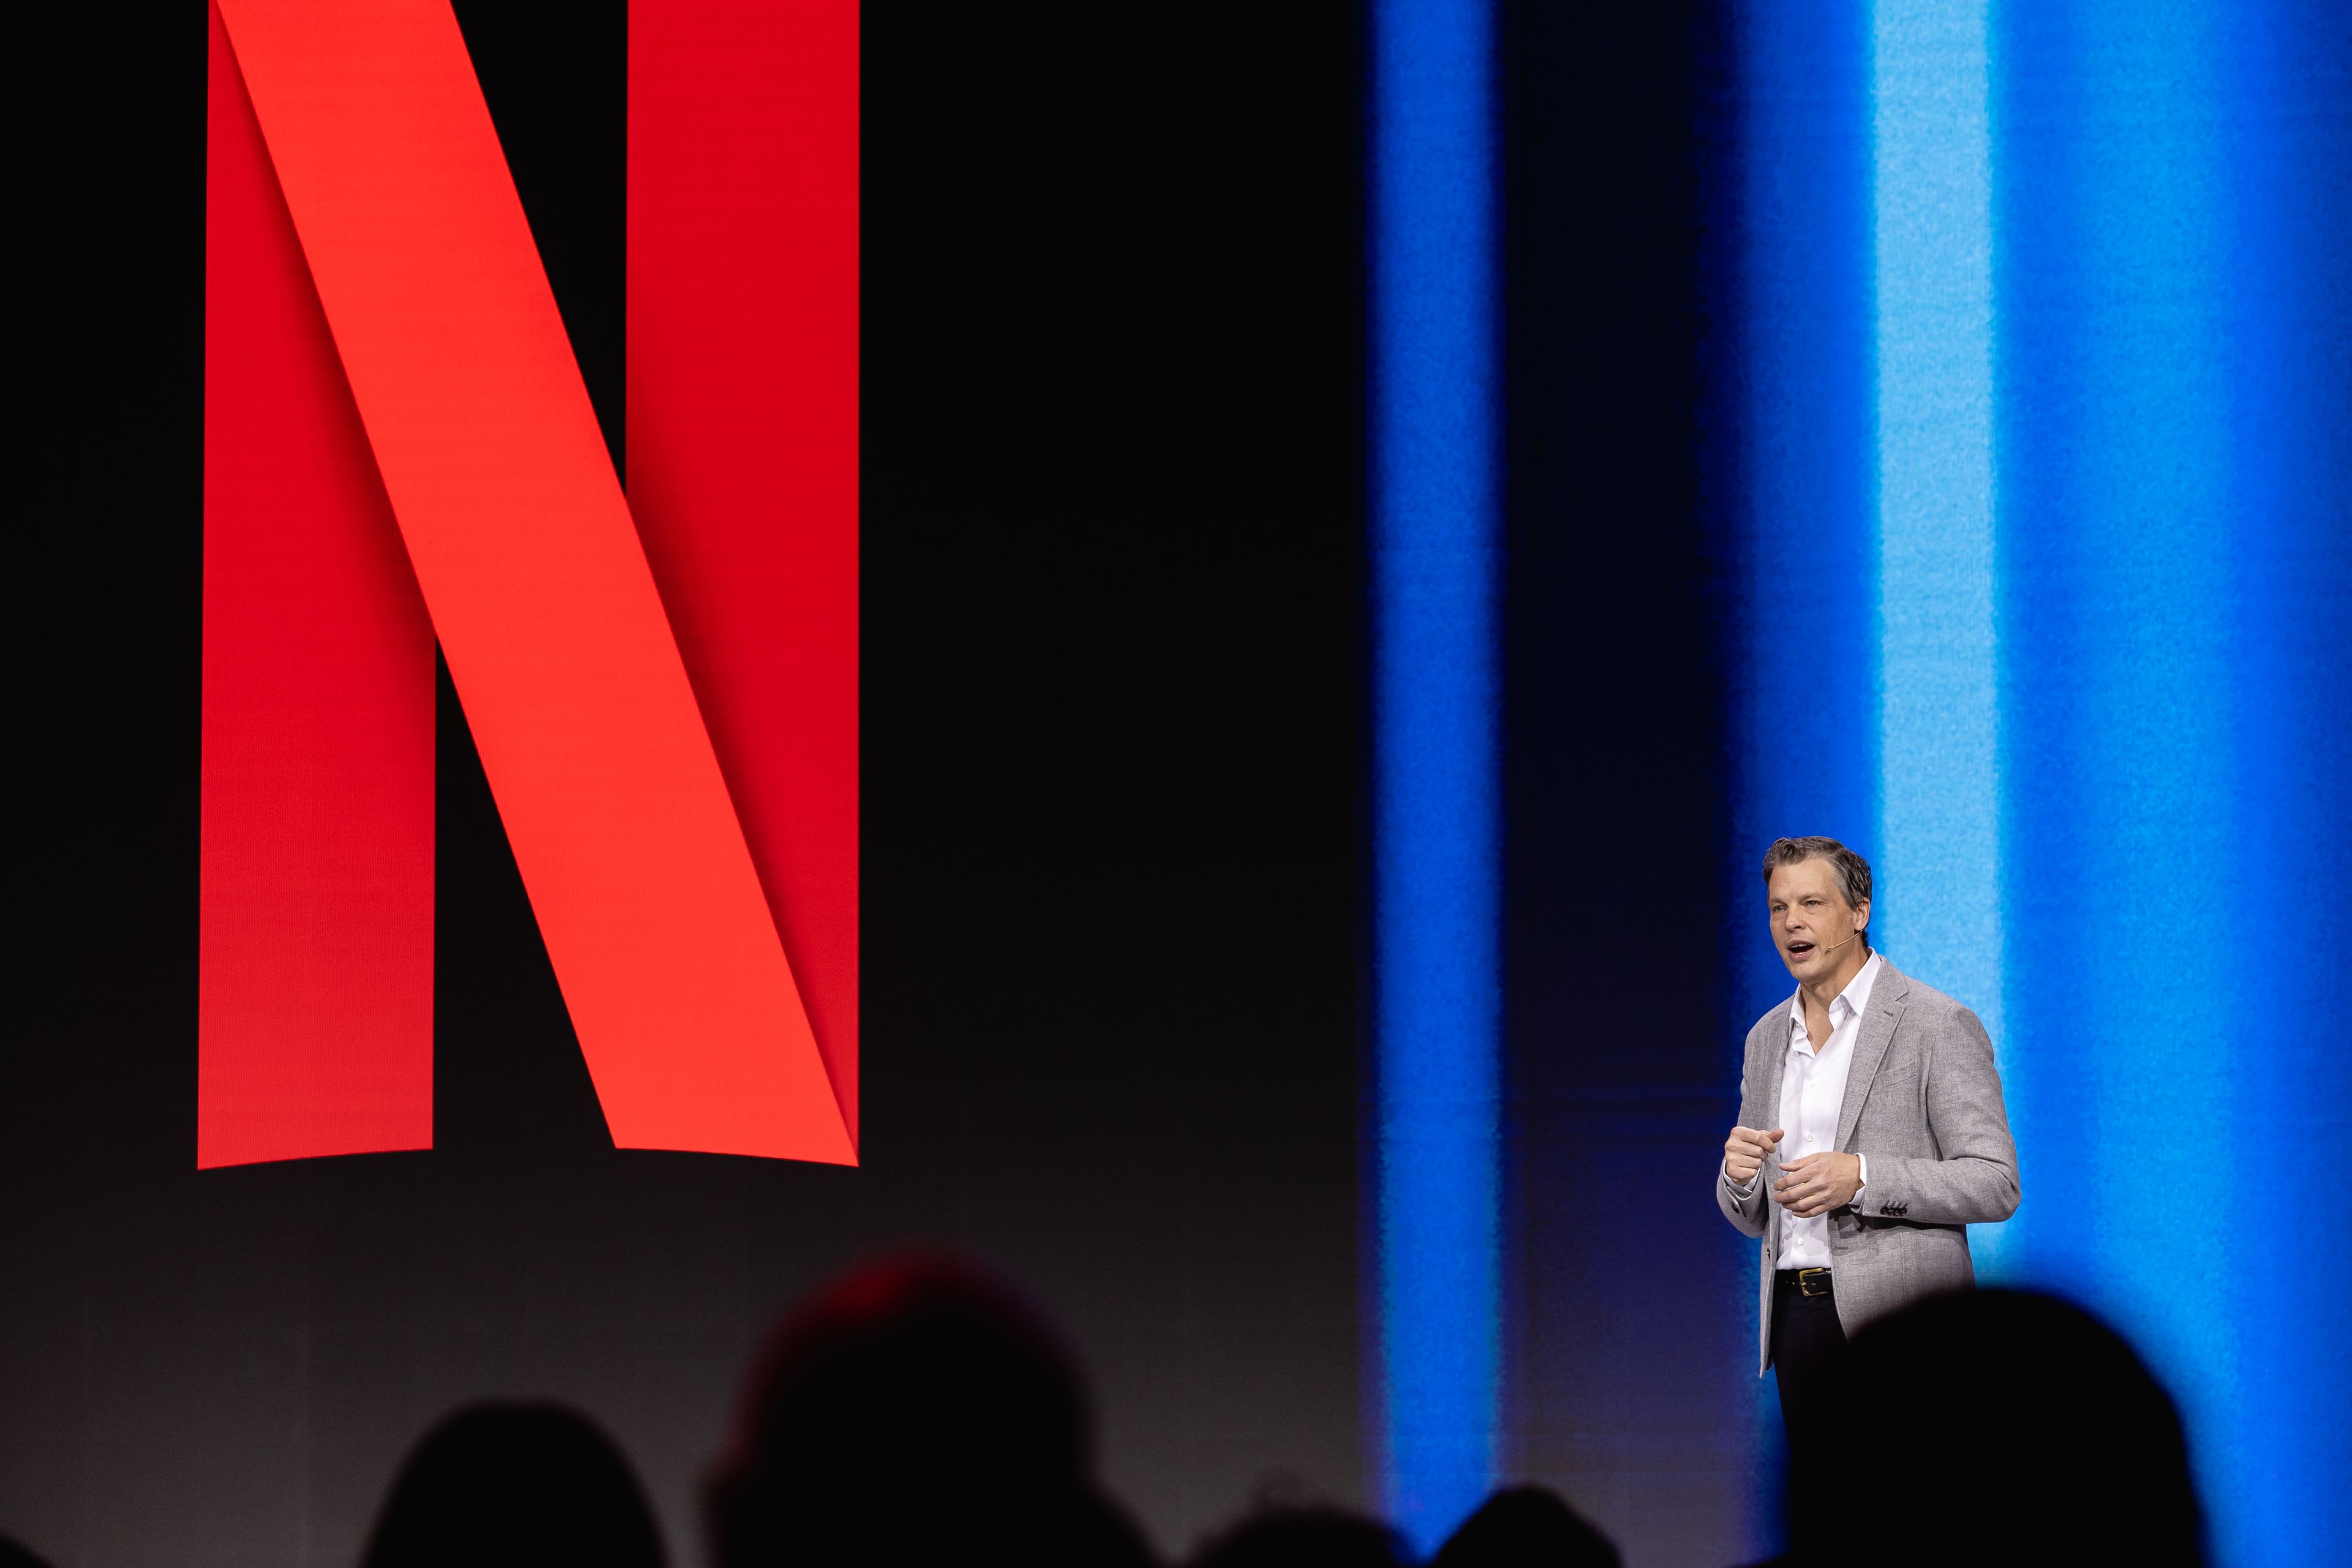 Greg Peters, co-CEO of Netflix, during his speech at the Mobile World Congress.